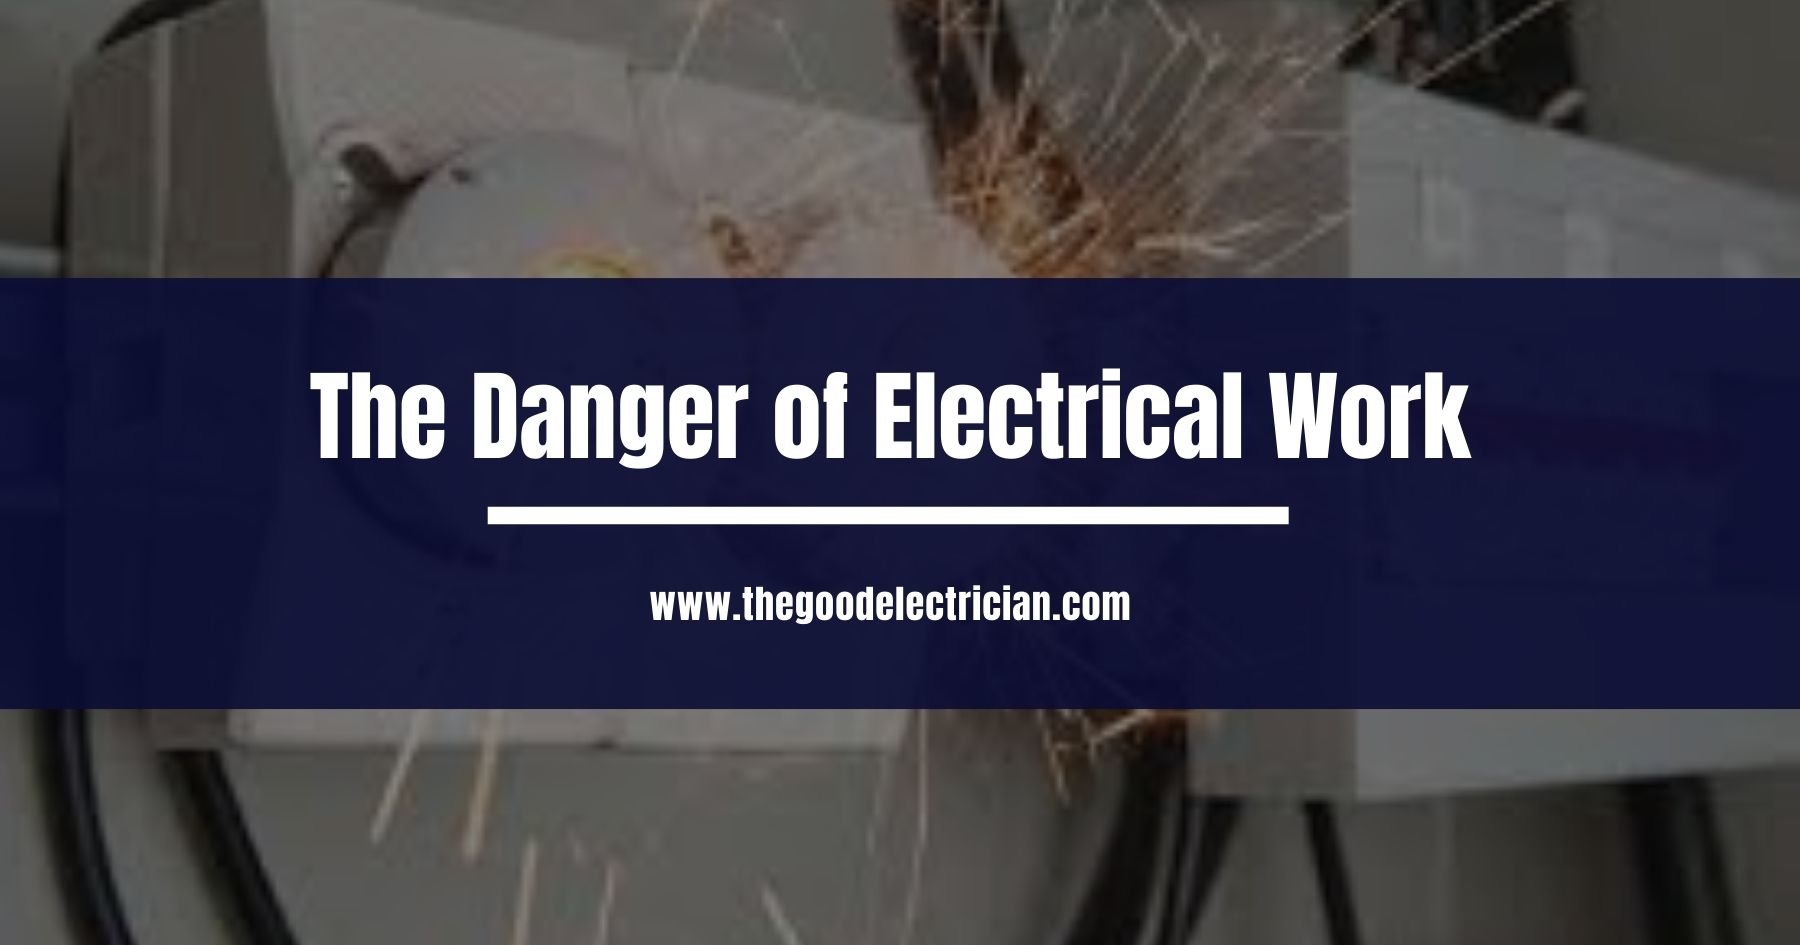 You are currently viewing The Danger of Electrical Work